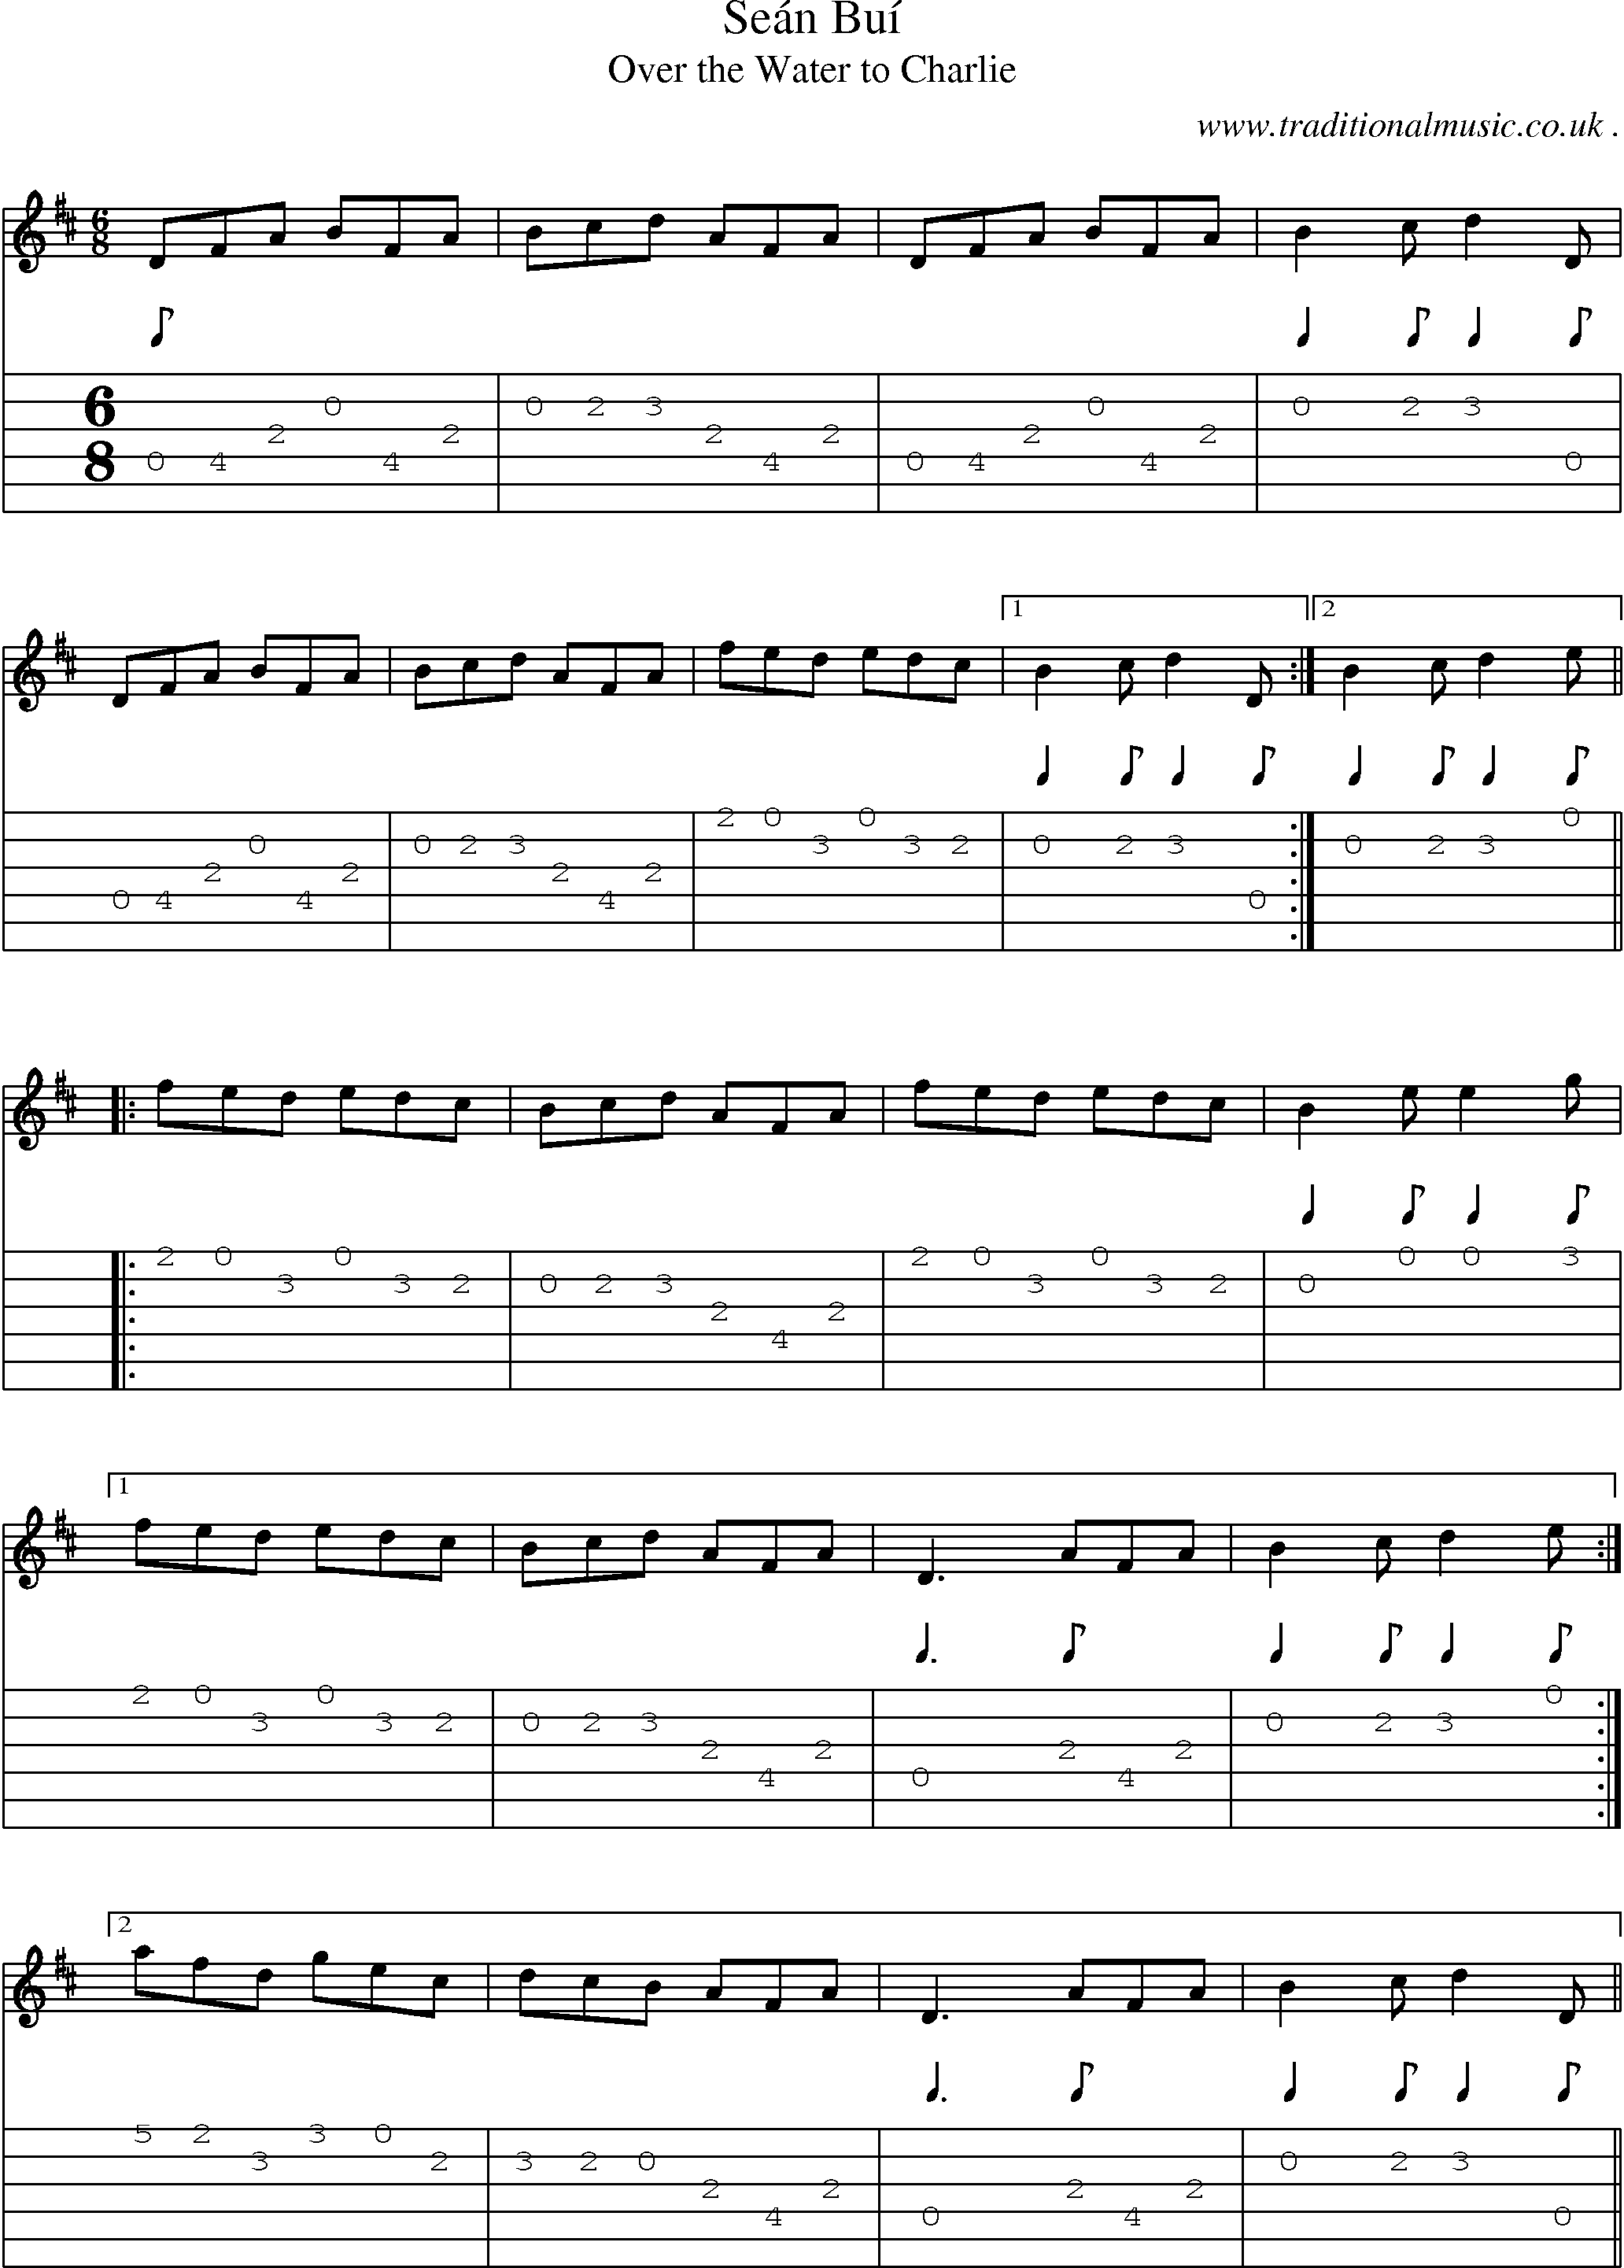 Sheet-Music and Guitar Tabs for Sean Bui